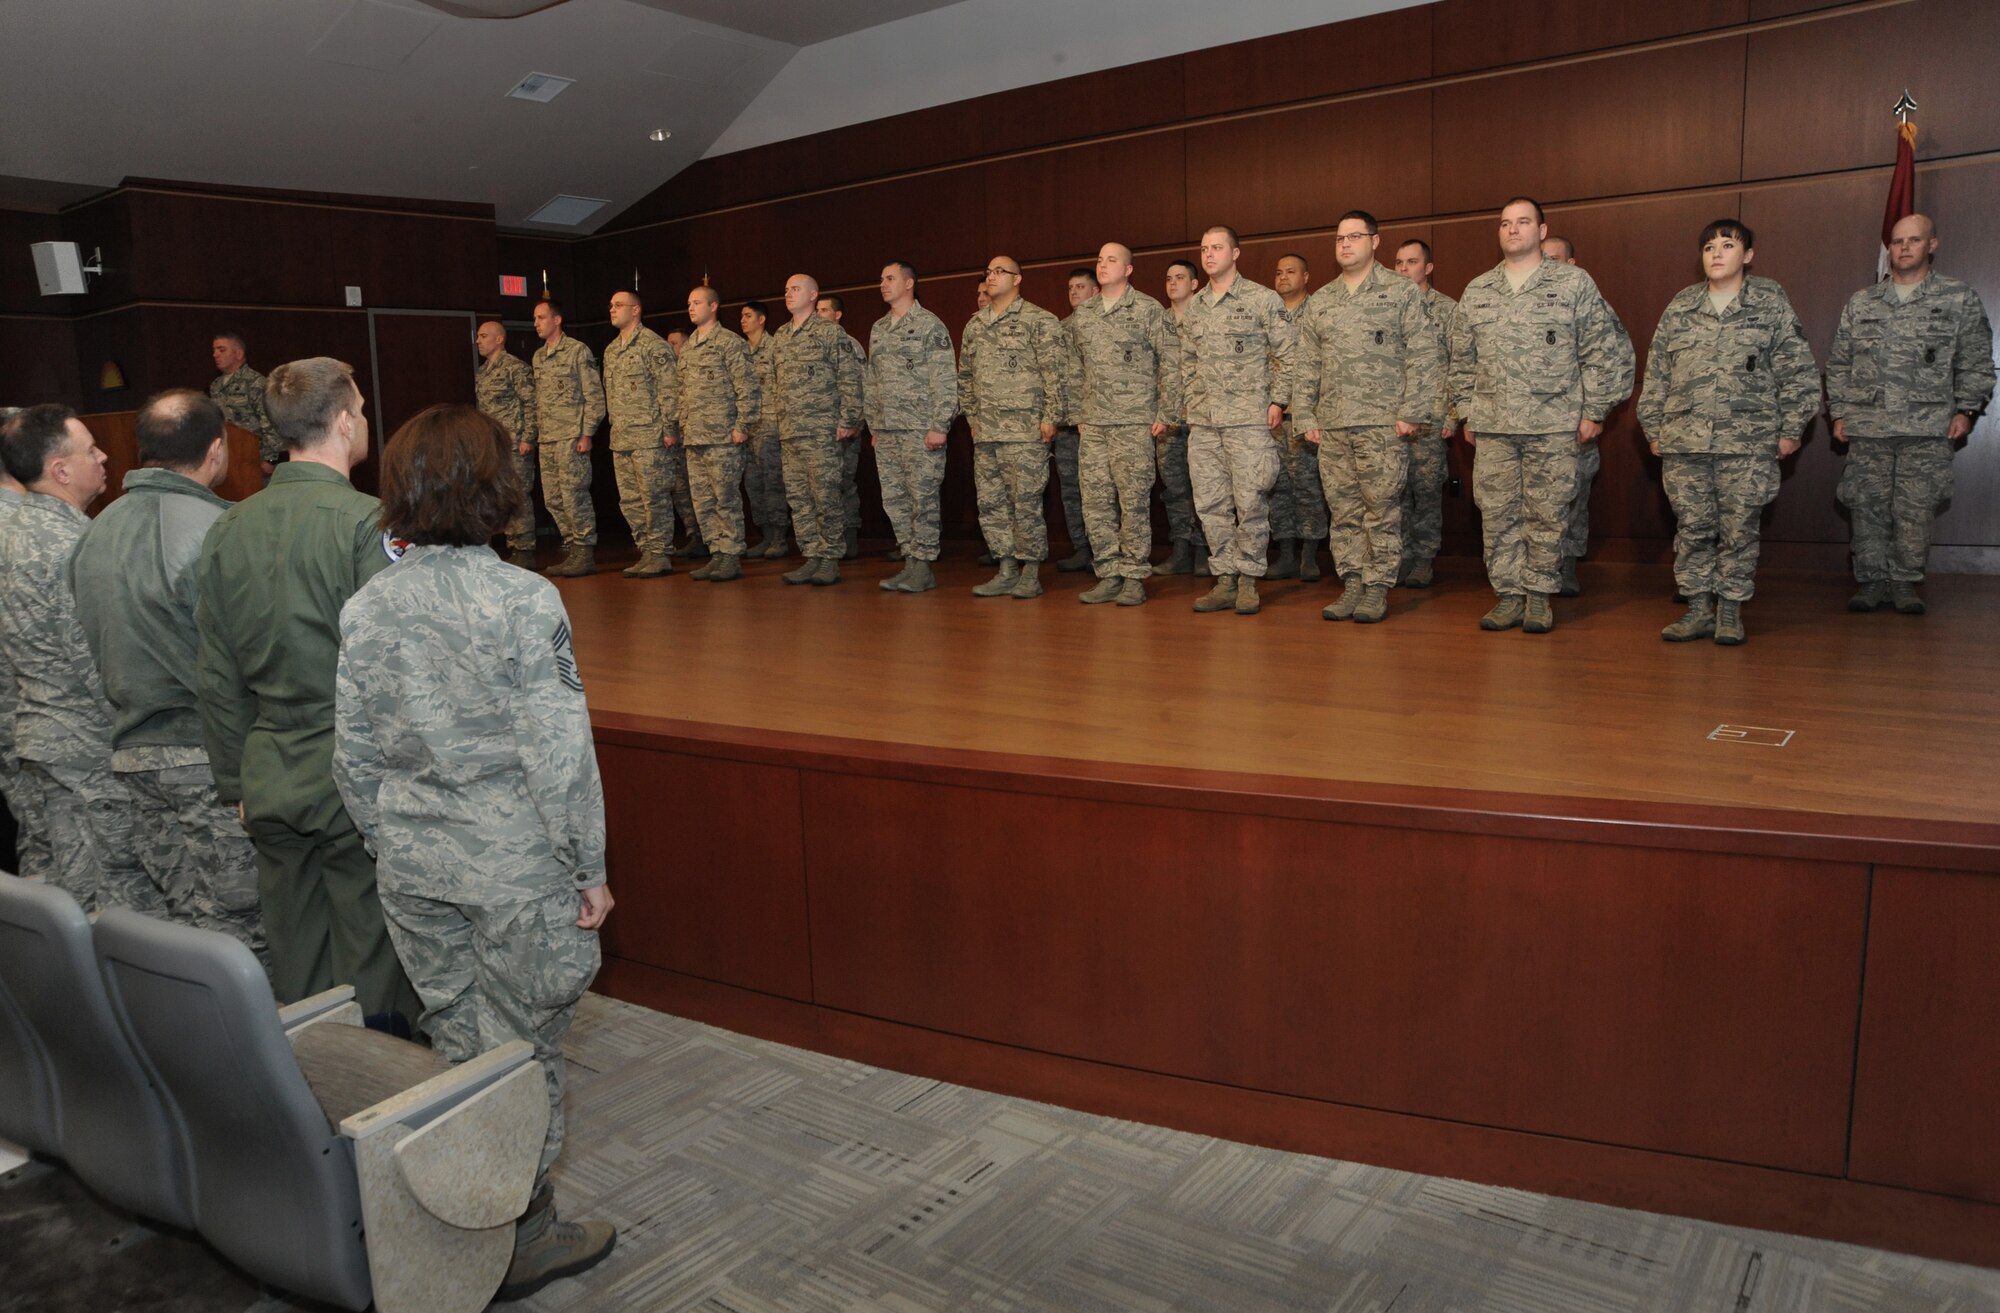 Oregon Air National Guard senior leaders stand (to the left) as they acknowledge members of the 142nd Fighter Wing Security Forces during the mobilization ceremony for the 142nd Fighter Wing Security Forces Squadron at Camp Withycombe, Ore., Dec. 11, 2012. (U.S. Air Force photograph by Tech. Sgt. John Hughel, 142nd Fighter Wing Public Affairs/Released)